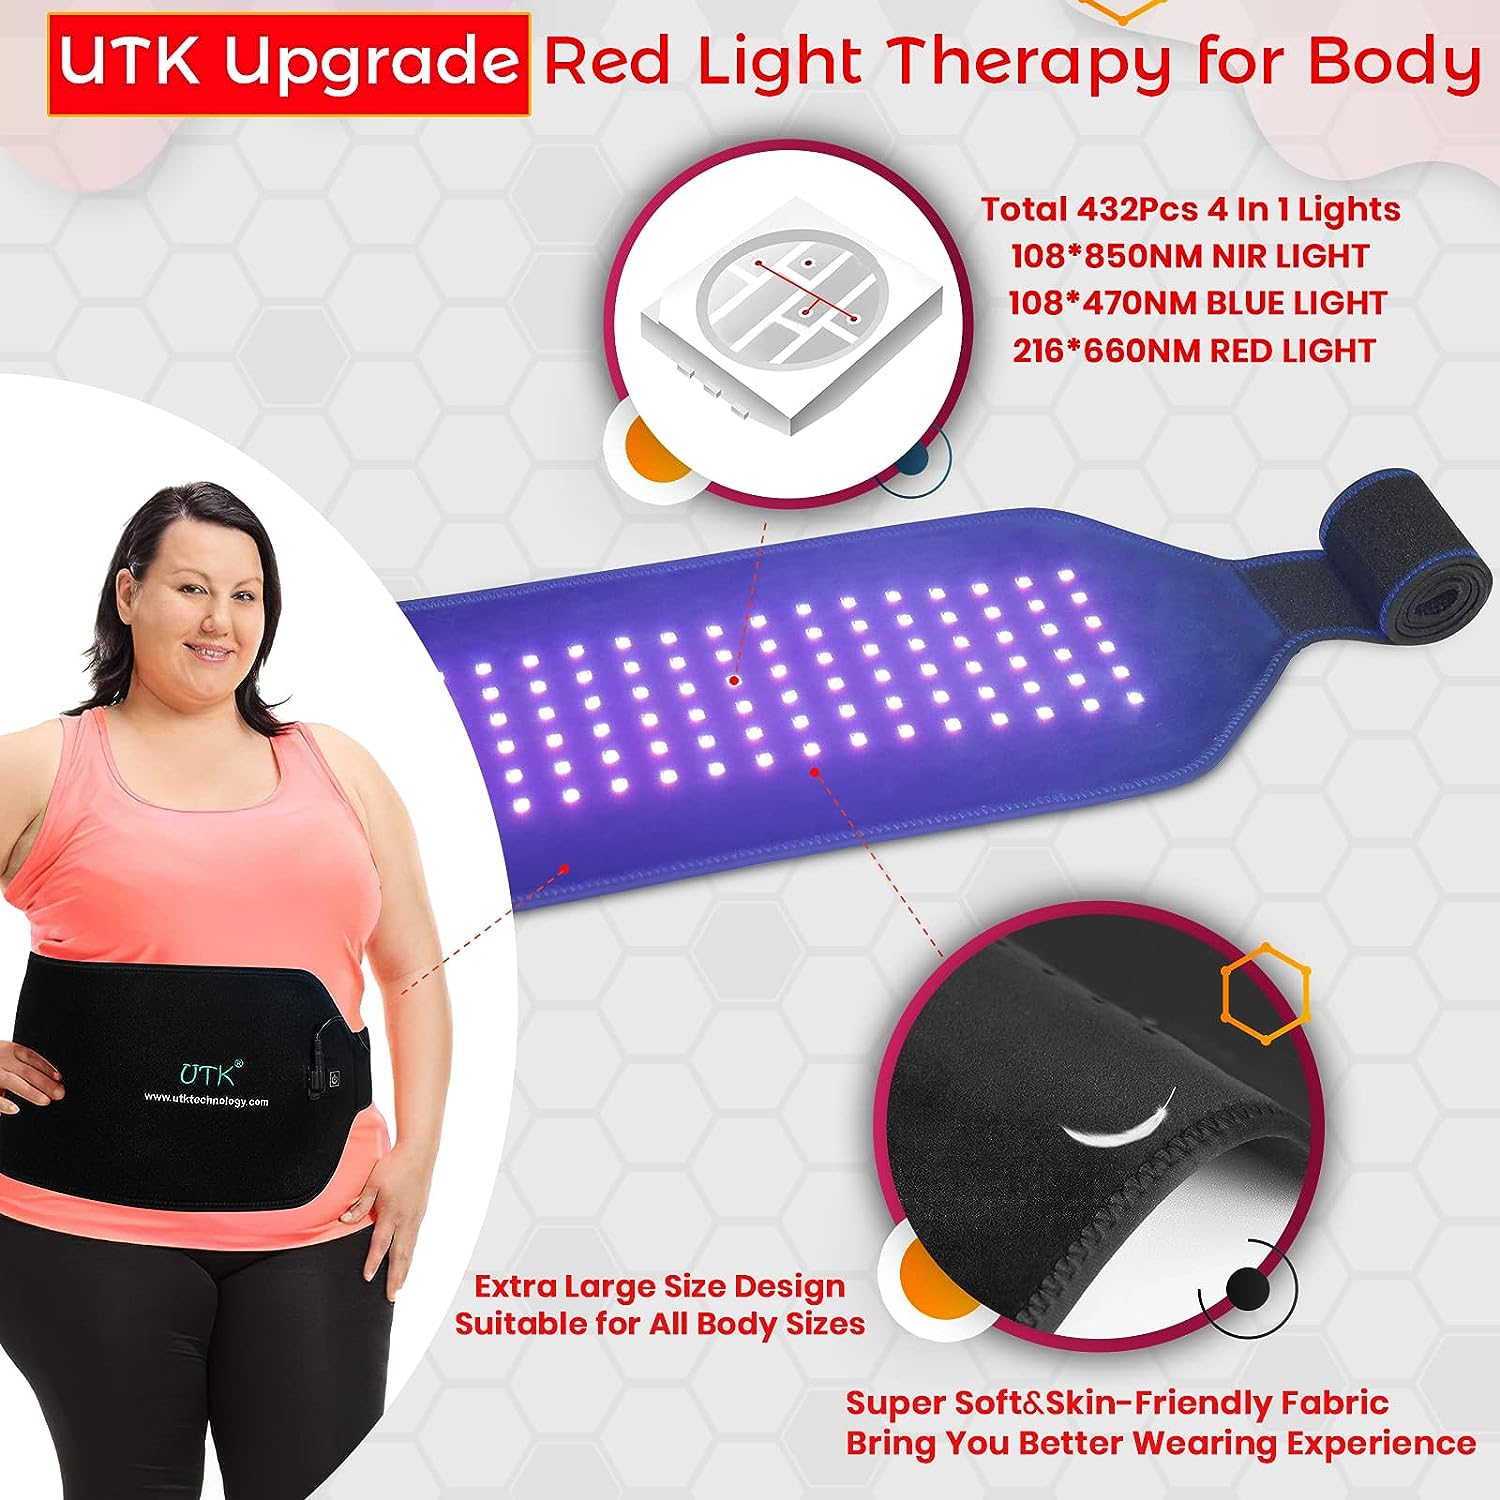 UTK Technology Red Light Therapy Belt for Body Pain Relief 4 in 1 Infrared Light Therapy Flexible Wearable Device M3GY1-01-B - Purely Relaxation